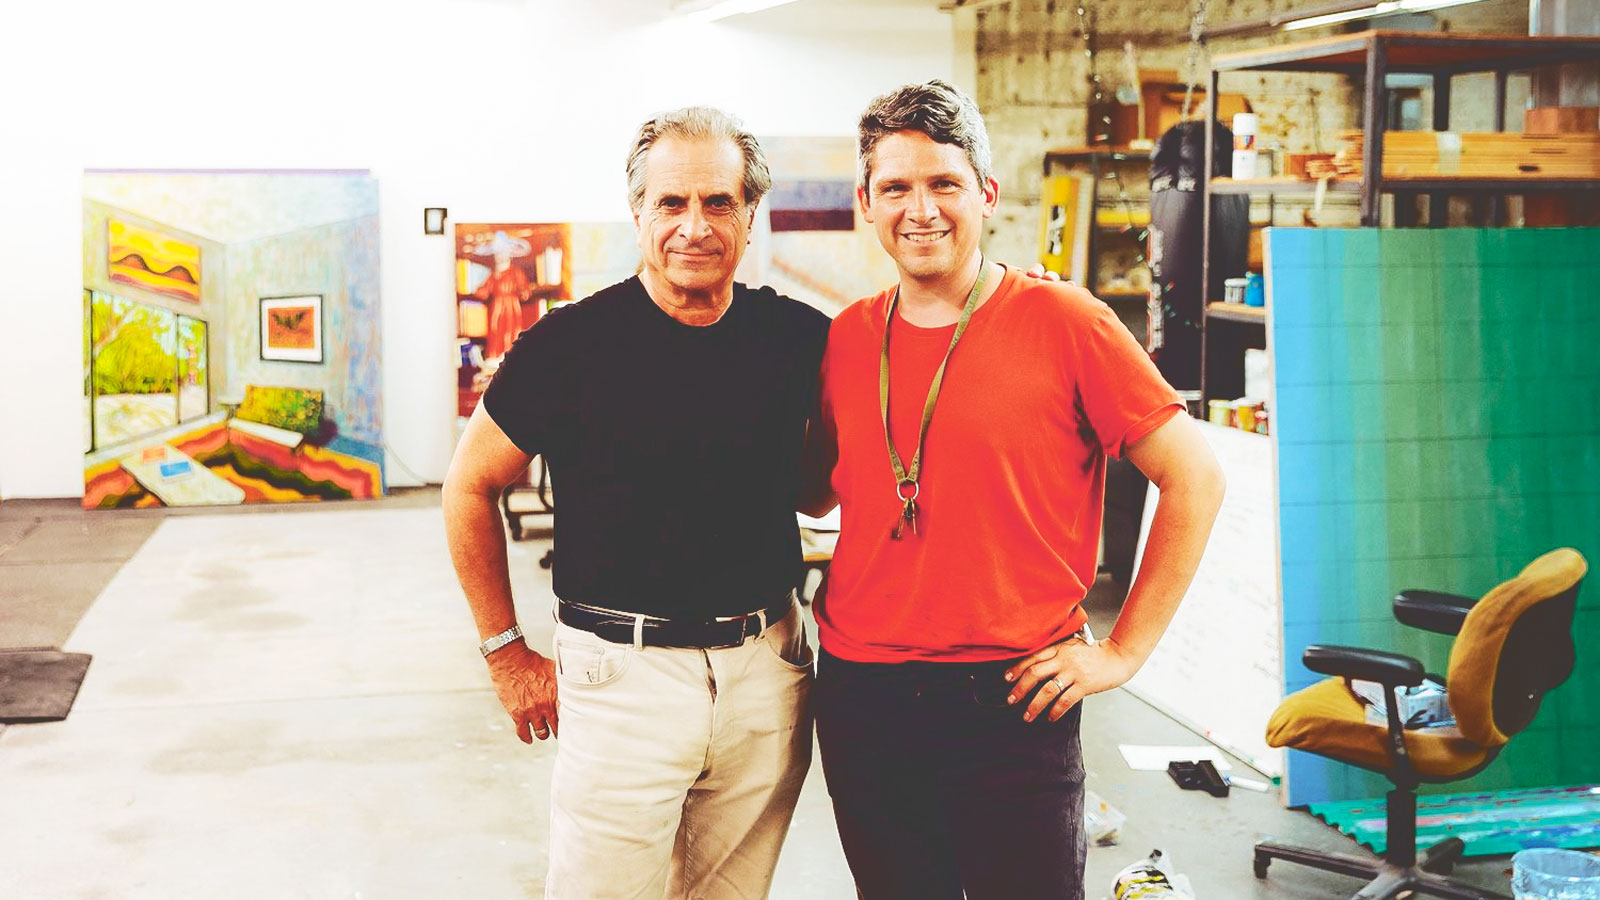 Gordon Sander and JJ Manford stand next to each other for a photo in a large art studio with several large colorful paintings in the background